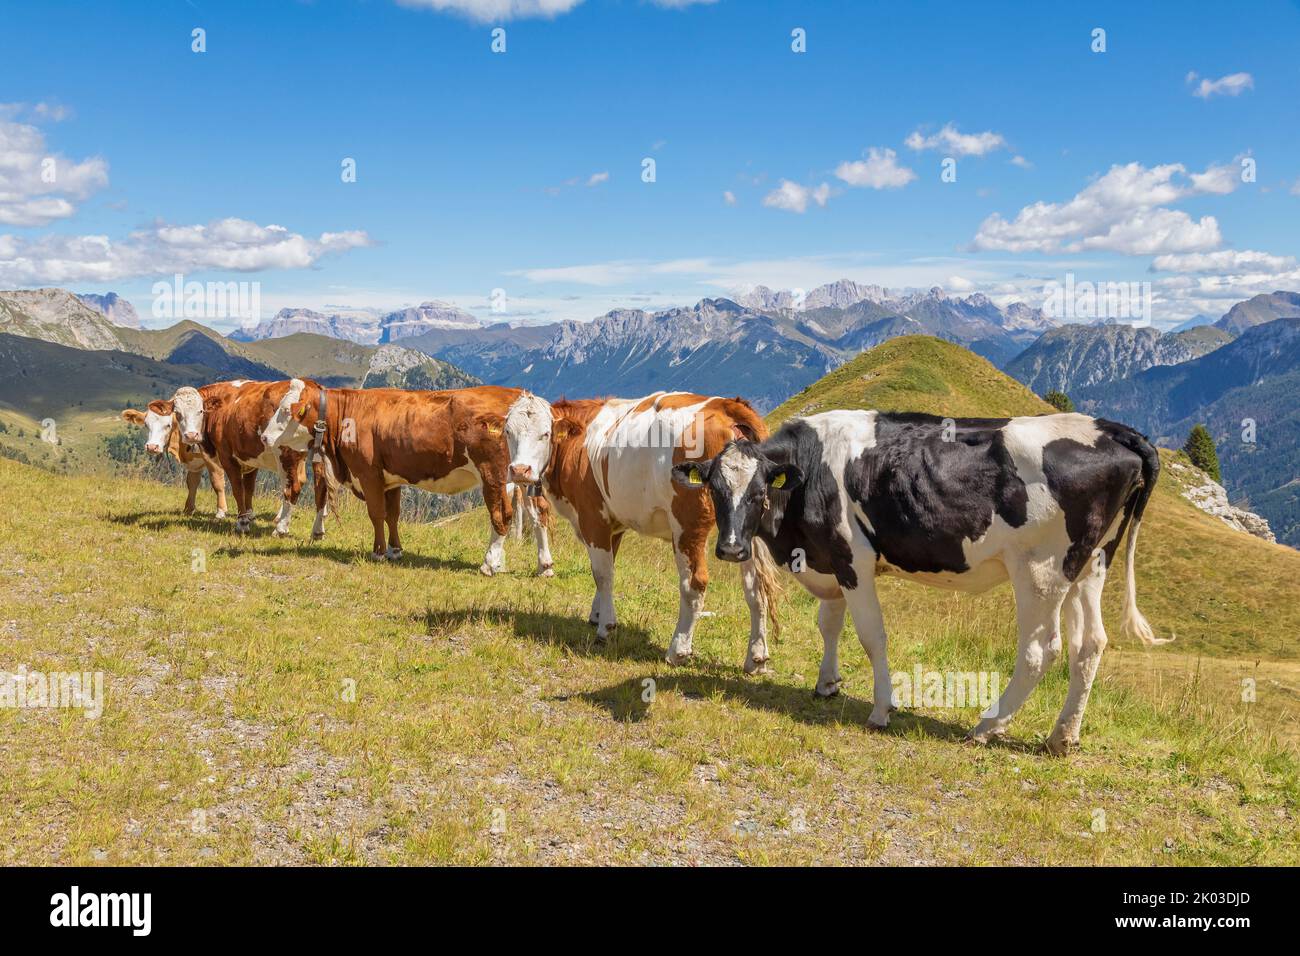 Italy, Trentino, province of Trento, Predazzo, Dos Capel. Group of cows grazing on a mountain pasture with mountains in the background Stock Photo